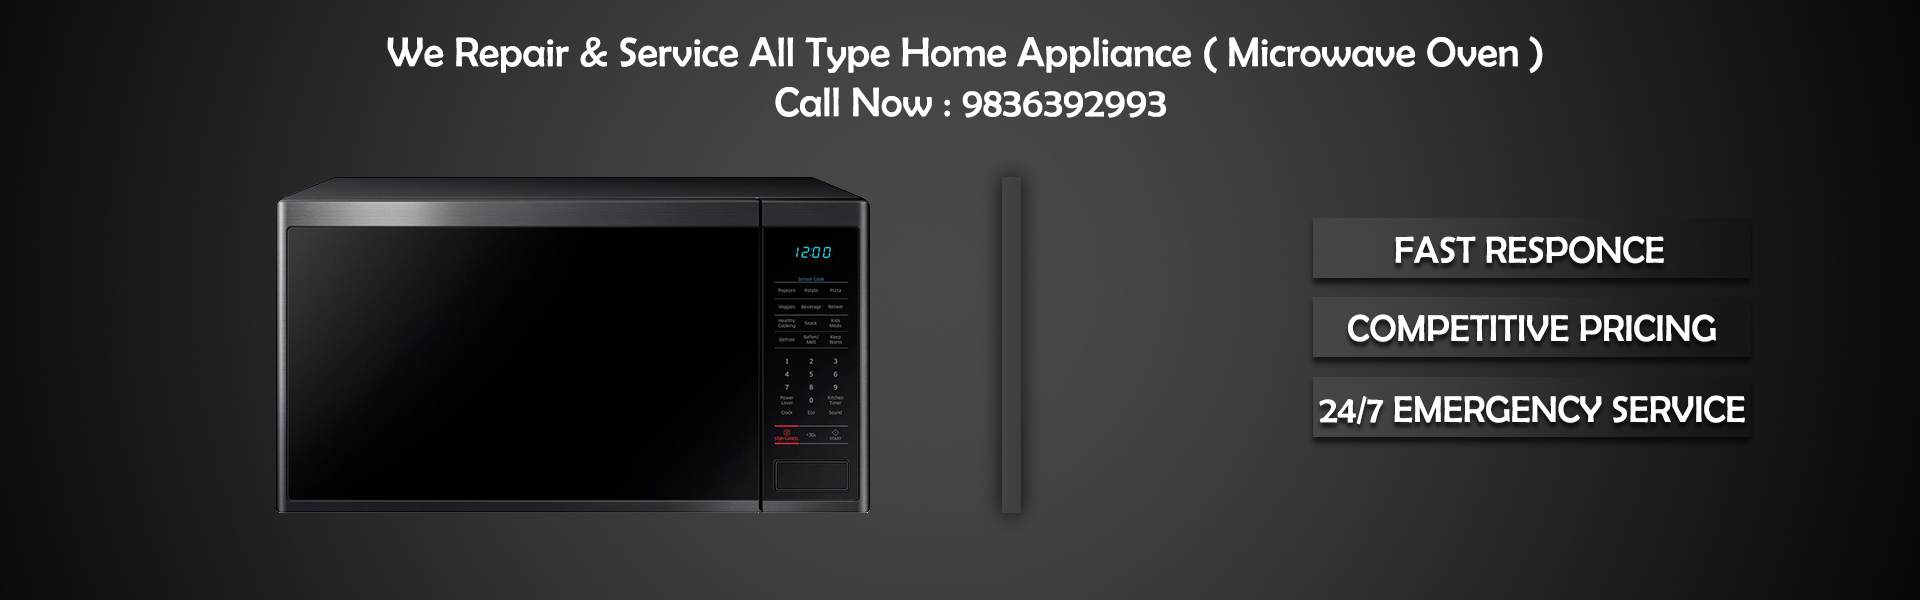 Customer Care North Microwave Oven Repair & Service Banner